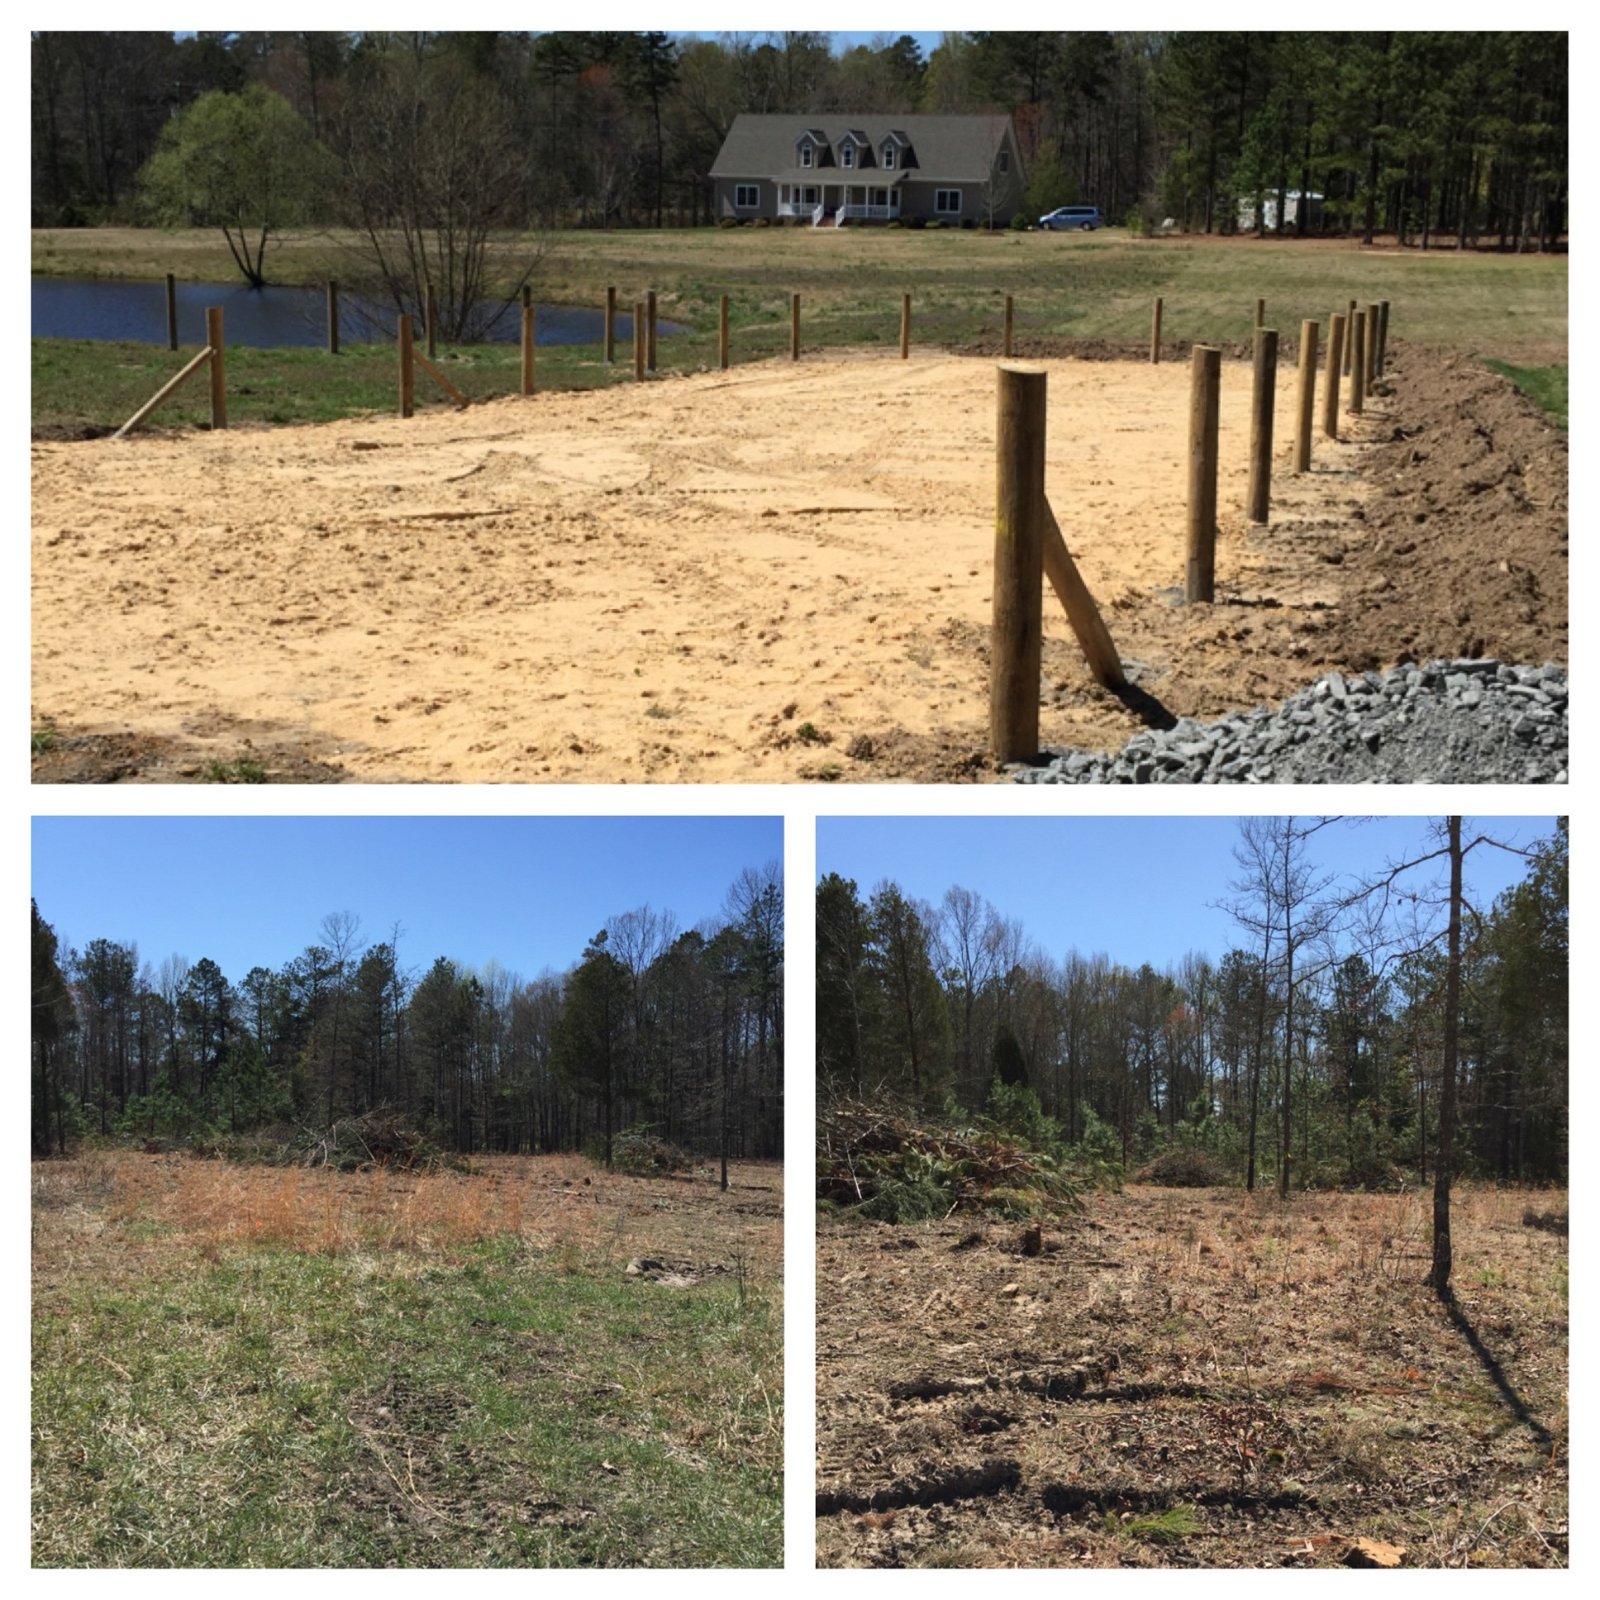 Dry lot and farm property